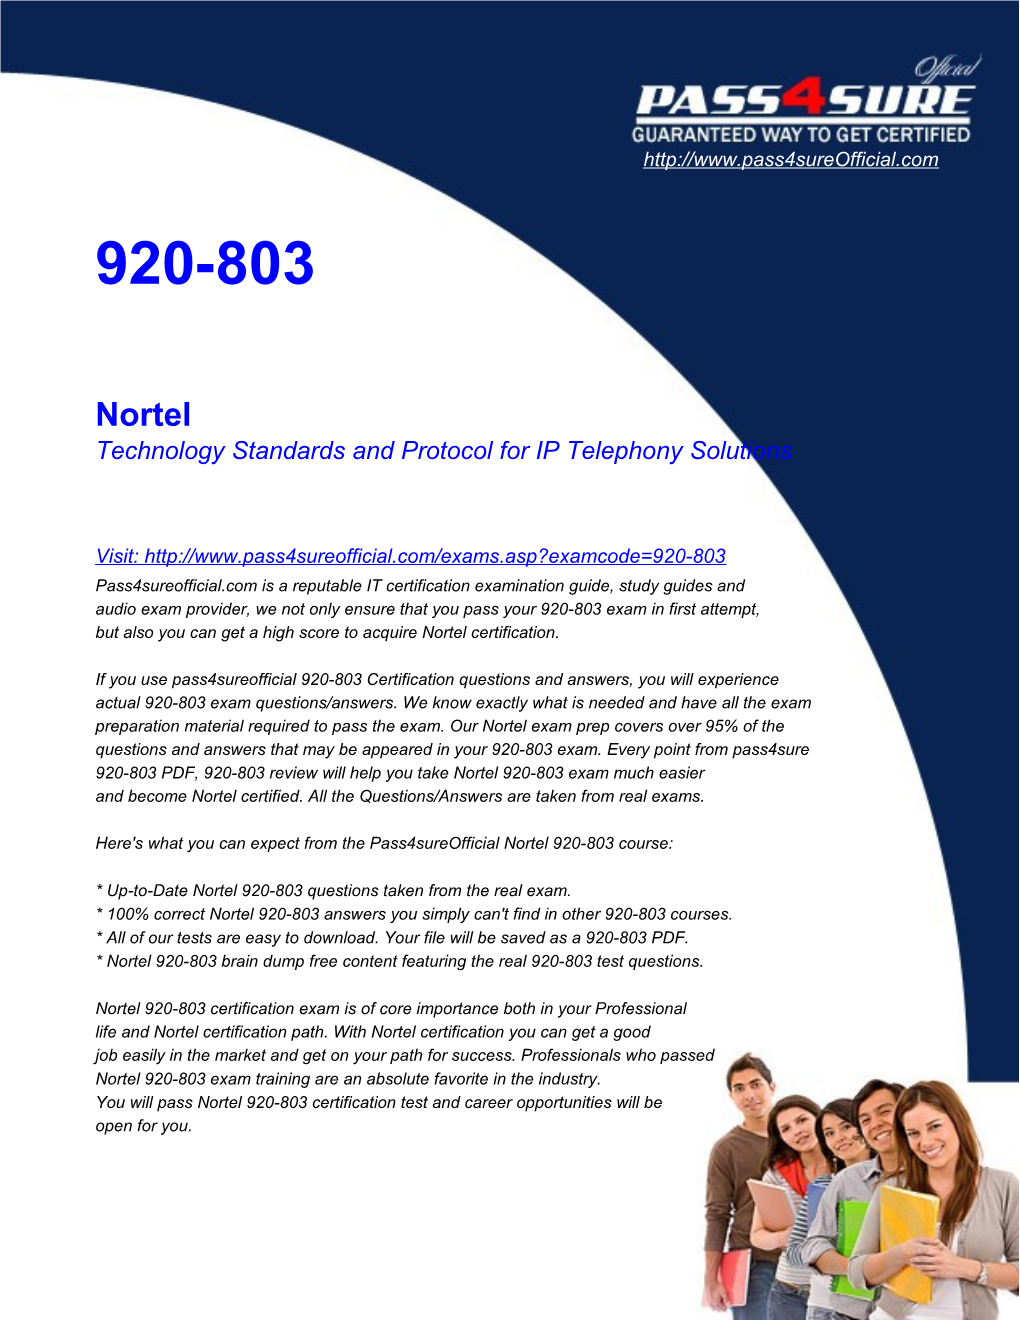 Technology Standards and Protocol for IP Telephony Solutions